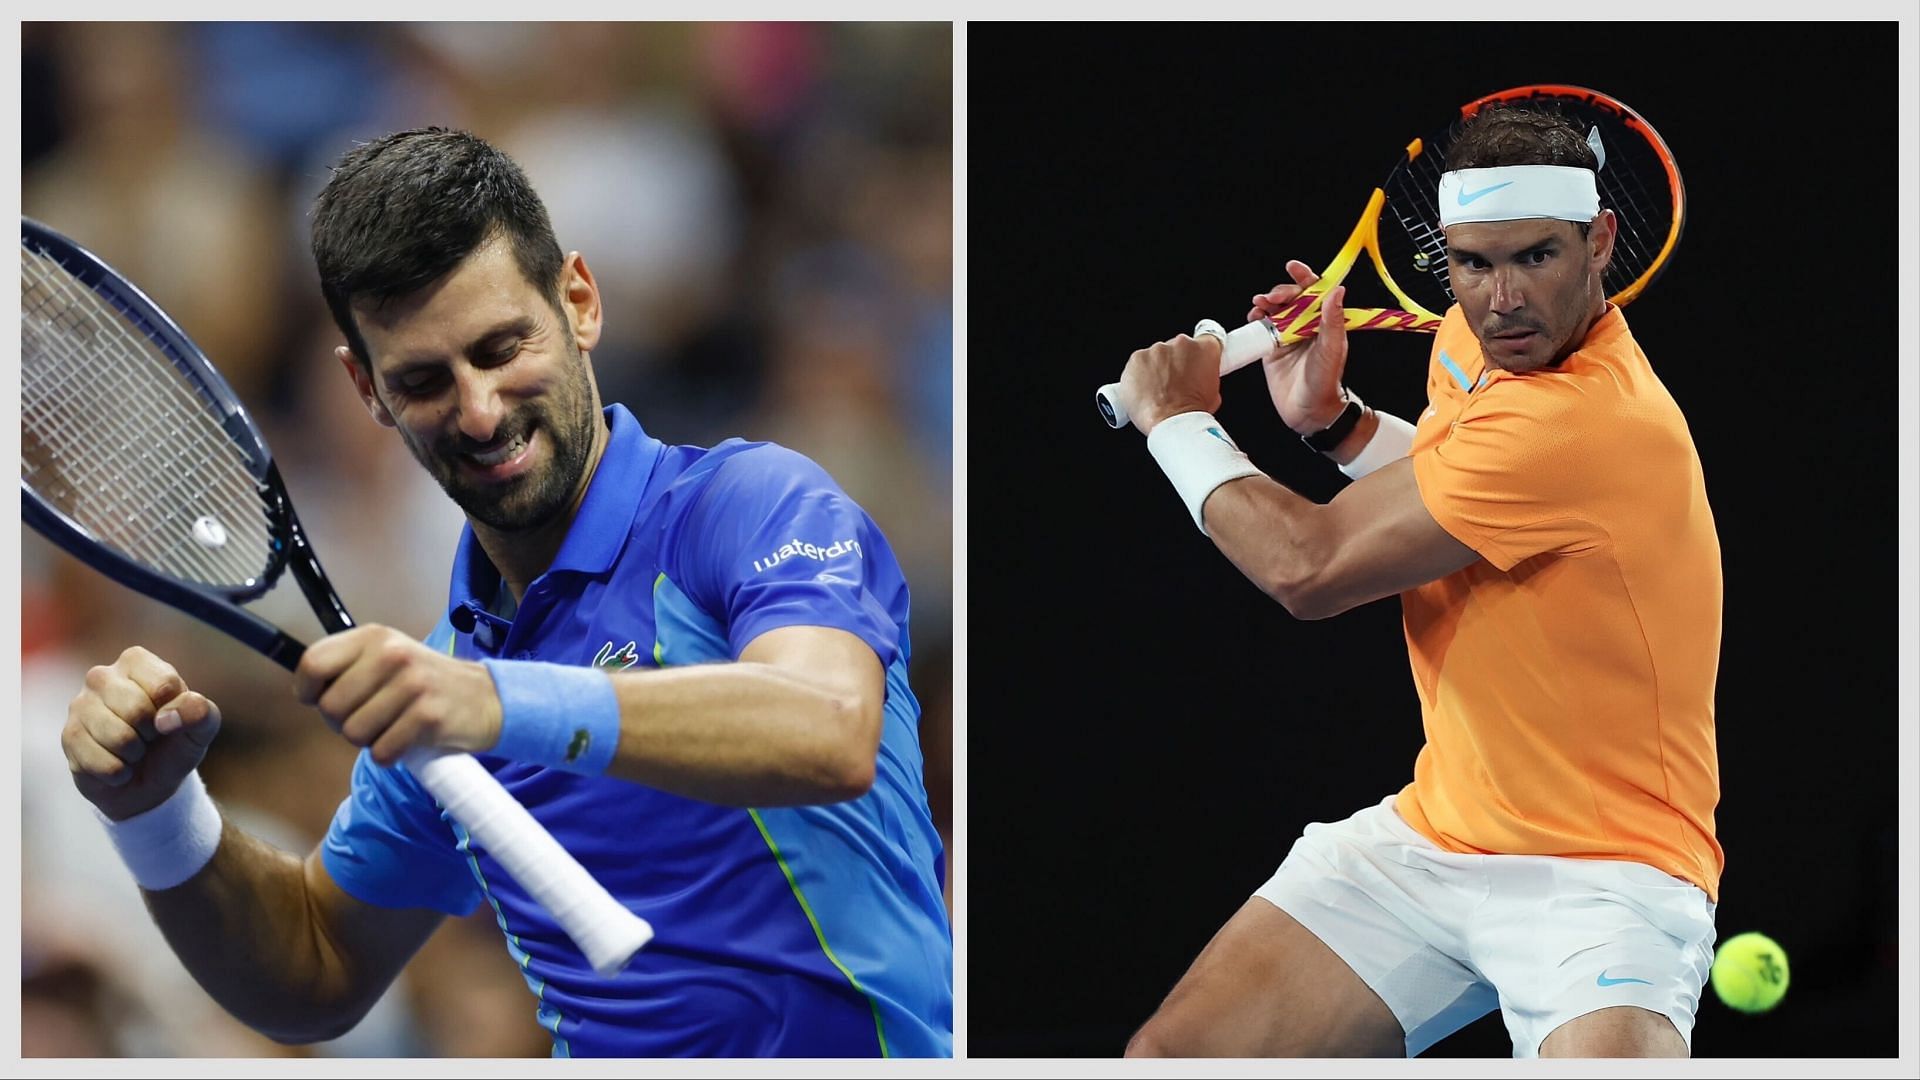 Novak Djokovic and Rafael Nadal are set to participate at the French Open